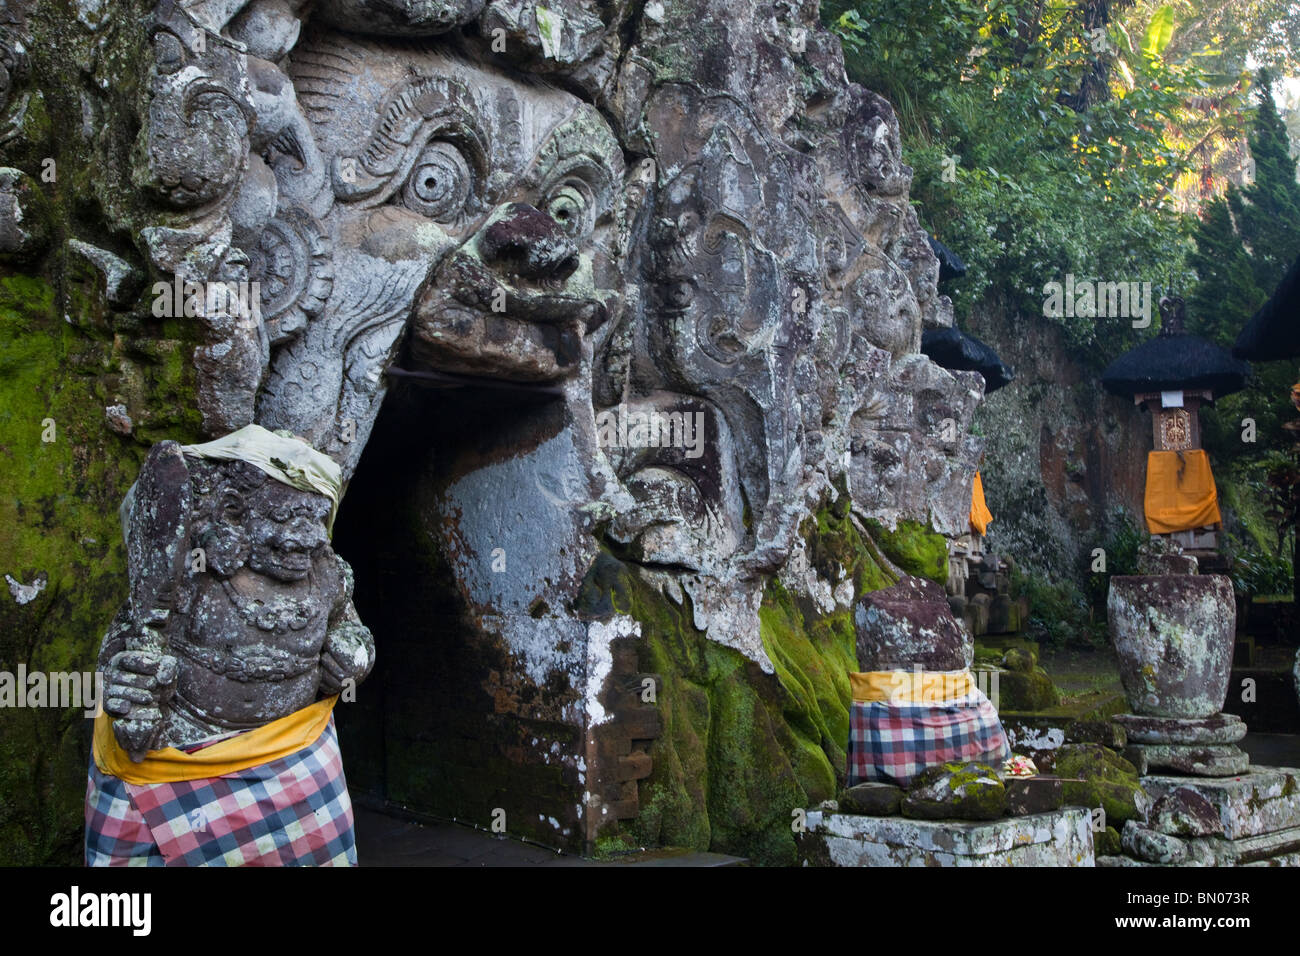 Goa Gajah, commonly known as the Elephant Cave, is located in a steep valley just outside of Ubud near the village of Bedulu. Stock Photo